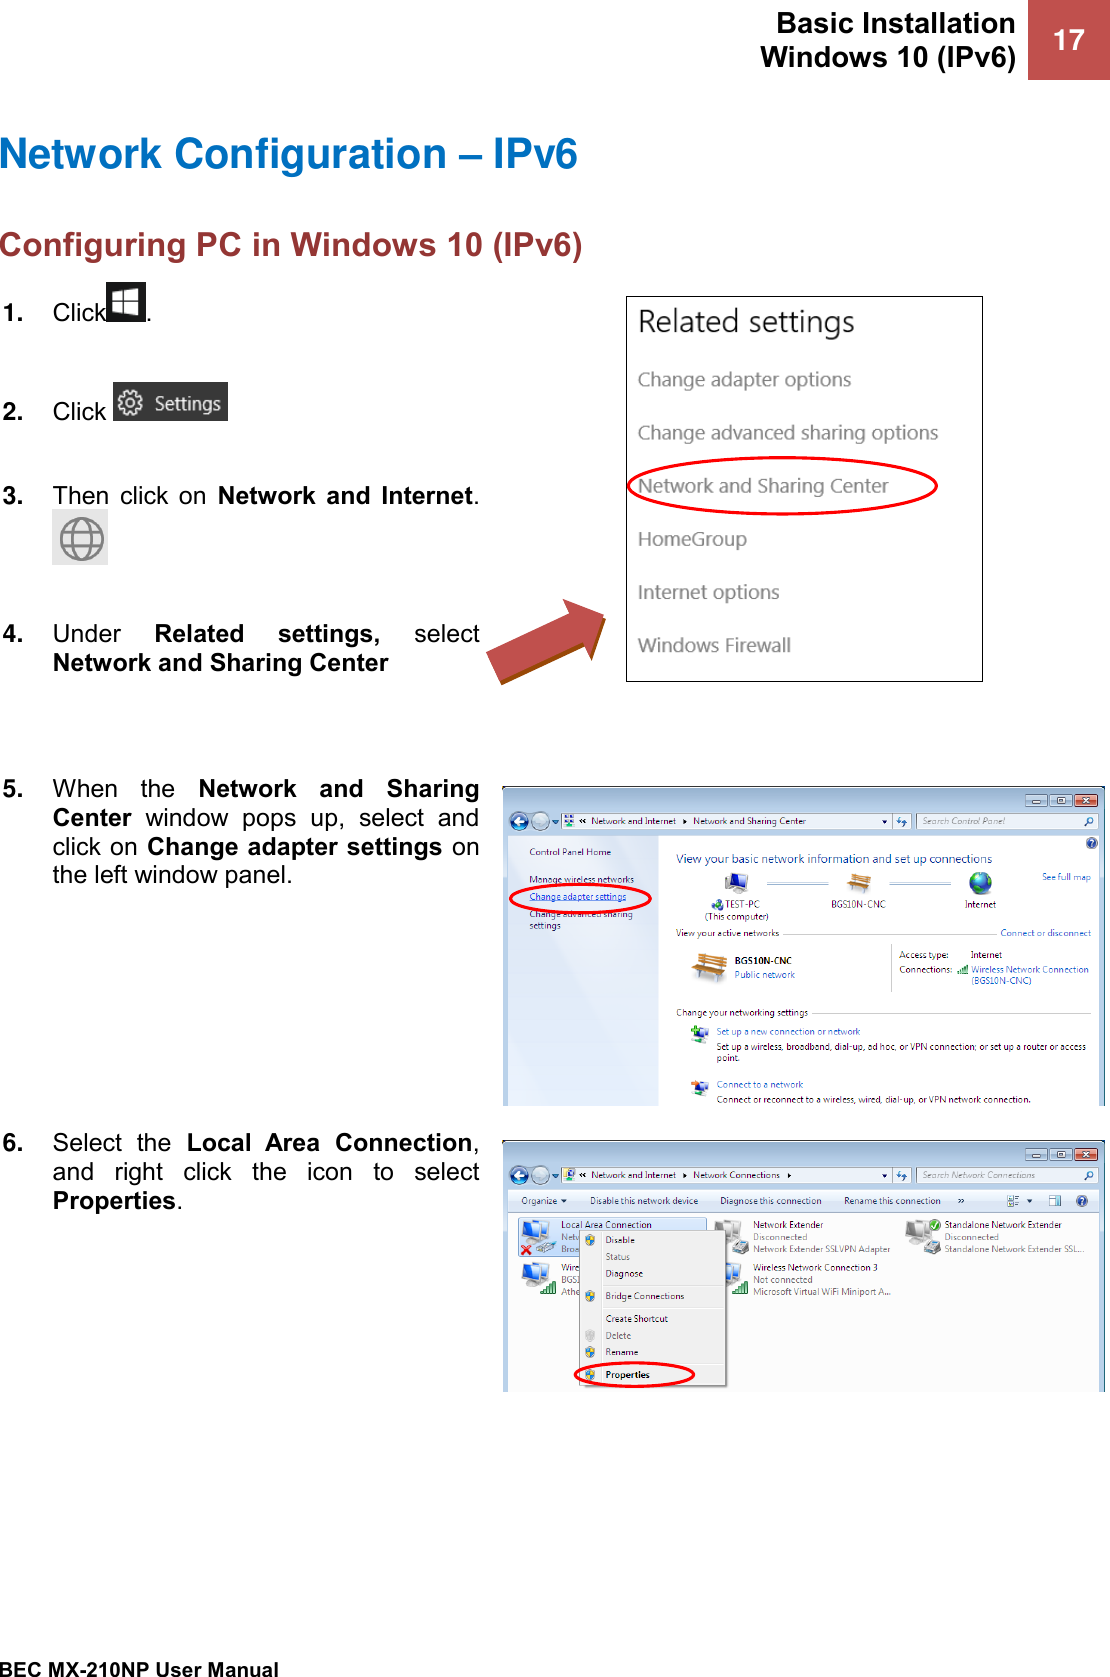 Basic Installation Windows 10 (IPv6) 17   BEC MX-210NP User Manual  Network Configuration – IPv6 Configuring PC in Windows 10 (IPv6)  1. Click .  2. Click    3. Then  click  on  Network  and  Internet.   4. Under  Related  settings,  select Network and Sharing Center    5. When  the  Network  and  Sharing Center  window  pops  up,  select  and click on Change adapter settings on the left window panel.  6. Select  the  Local  Area  Connection, and  right  click  the  icon  to  select Properties.  